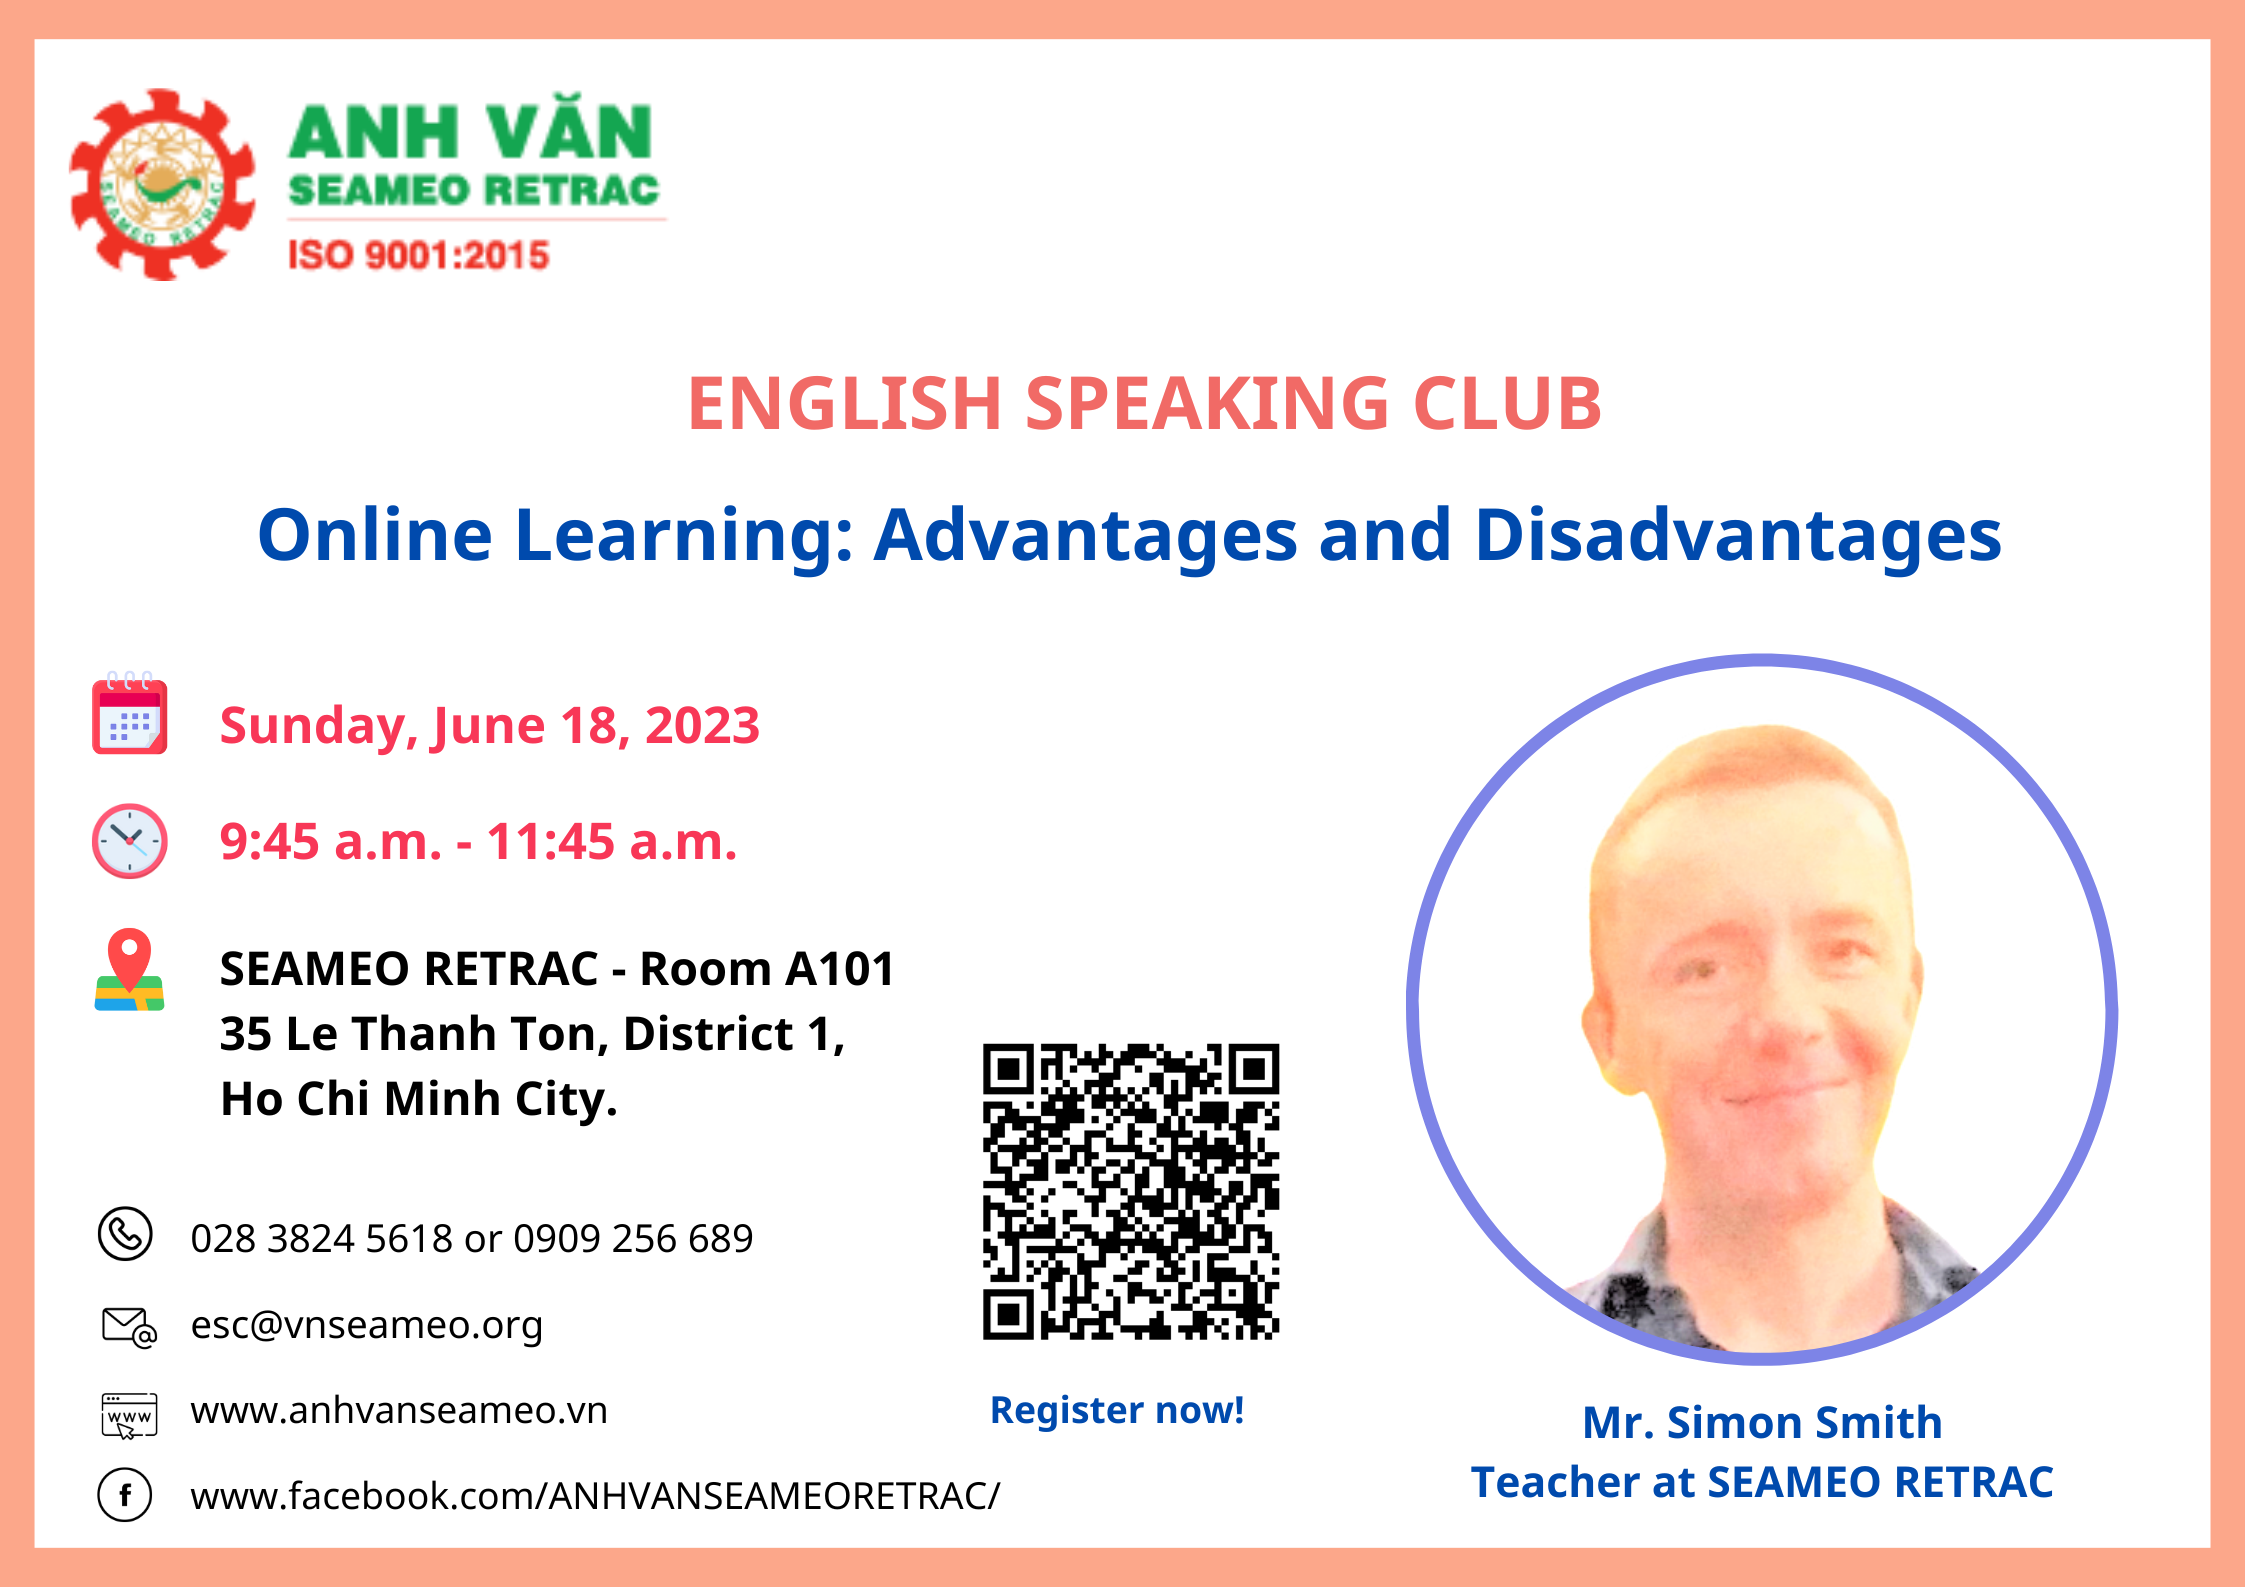 English Speaking Club titled “Online Learning: Advantages and Disadvantages”